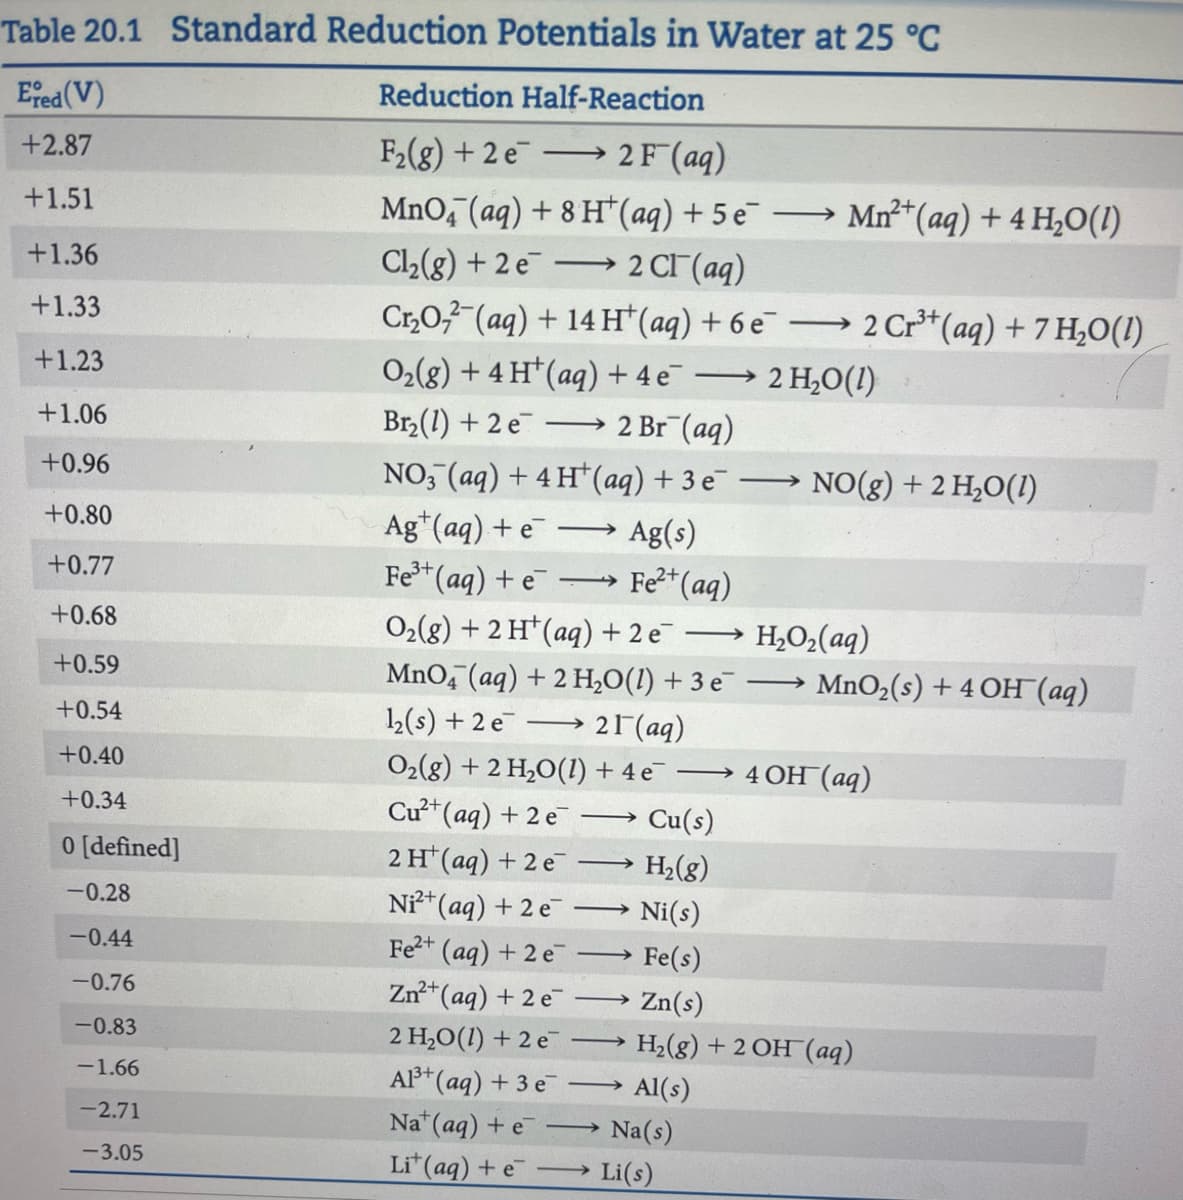 Table 20.1 Standard Reduction Potentials in Water at 25 °C
Efed (V)
Reduction Half-Reaction
+2.87
F2(g) + 2 e
→ 2F (aq)
Mn²*(aq) + 4 H,O(1)
MnO, (aq) + 8 H"(aq) + 5 e
→ 2 CF (aq)
Cr,0,-(aq) + 14 H*(aq) + 6 e
+1.51
+1.36
Cl,(8) + 2 e
>
+1.33
2 Cr* (aq) + 7 H,O(1)
>
+1.23
O2(g) + 4 H* (aq) + 4 e
2 H,0(1)
>
Br,(1) + 2 e
NO, (aq) + 4 H*(aq) + 3 e
Ag*(aq) + e
Fe* (aq) + e
+1.06
2 Br (aq)
+0.96
NO(g) + 2 H,O(1)
+0.80
Ag(s)
+0.77
Fe2* (aq)
+0.68
O2(g) + 2 H*(aq) + 2 e
H,O2(aq)
>
+0.59
MnO, (aq) + 2 H,O(1) + 3 e
MnO2(s) + 4 OH(aq)
+0.54
2(s) + 2 e
21(aq)
+0.40
O2(g) + 2 H,O(1) + 4 e –→
4ОН (ад)
+0.34
Cư*(aq) + 2 e
2H' (ад) + 2 е
Cu(s)
0 [defined]
H2(g)
-0.28
Ni*(aq) + 2 e
Ni(s)
>
-0.44
Fe2+ (aq) + 2 e
Fe(s)
-
-0.76
Zn+(aq) + 2 e
Zn(s)
-0.83
2 H,O(1) + 2 e
H2(g) + 2 OH (aq)
-1.66
AB+(aq) + 3 e
Al(s)
>
-2.71
Na" (aq) + e
Na(s)
-3.05
Li"(aq) + e
Li(s)
>
